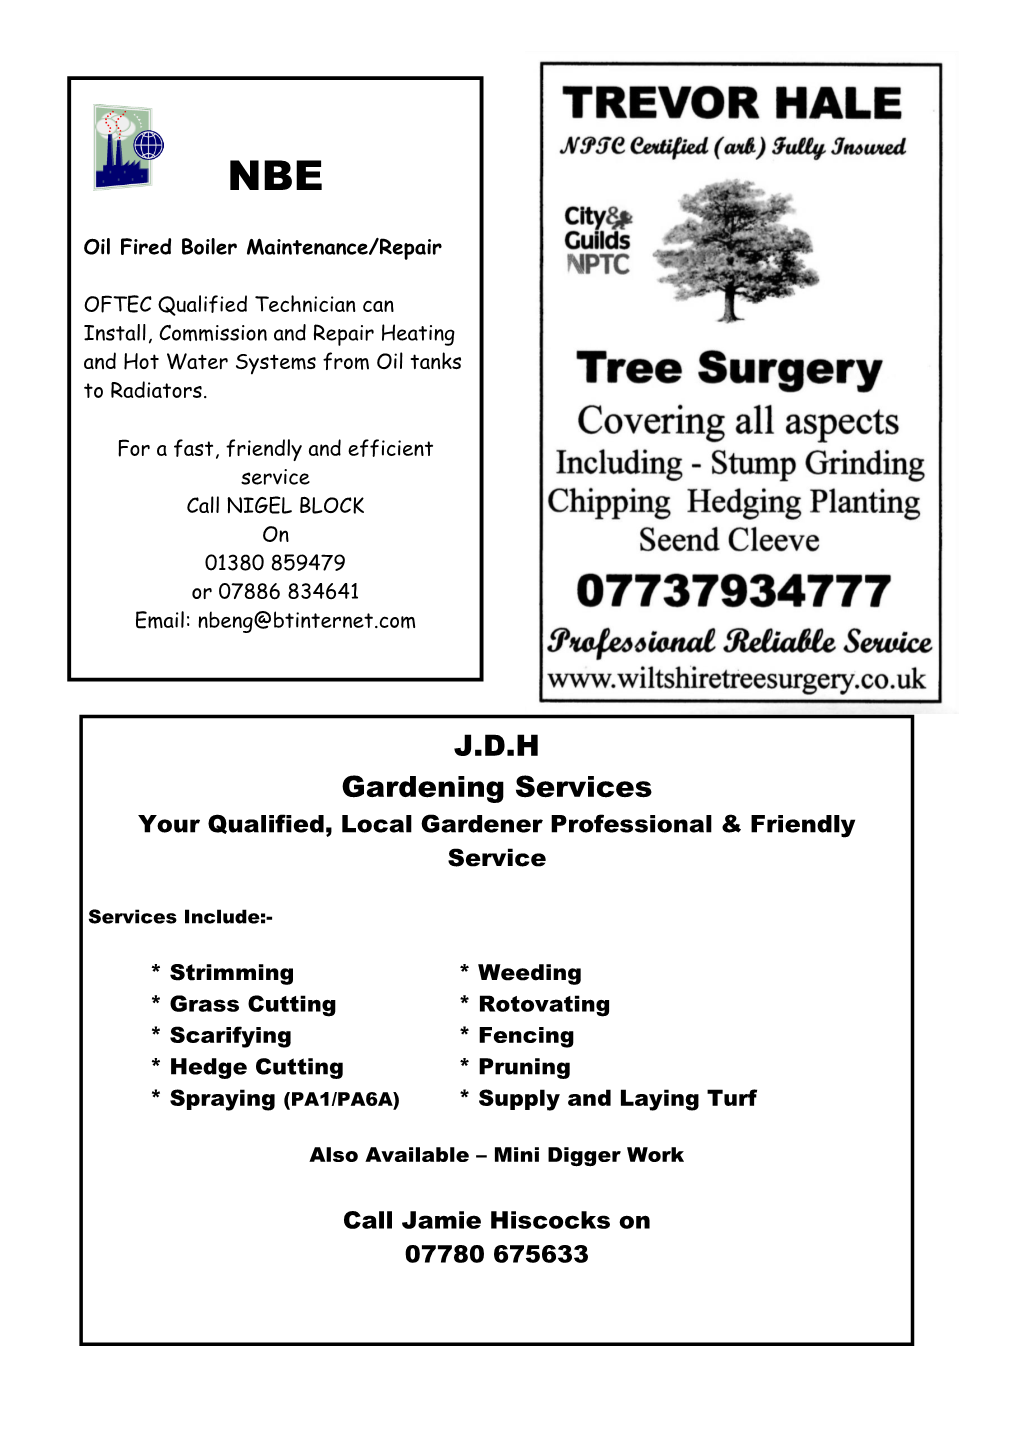 J.D.H Gardening Services Your Qualified, Local Gardener Professional & Friendly Service